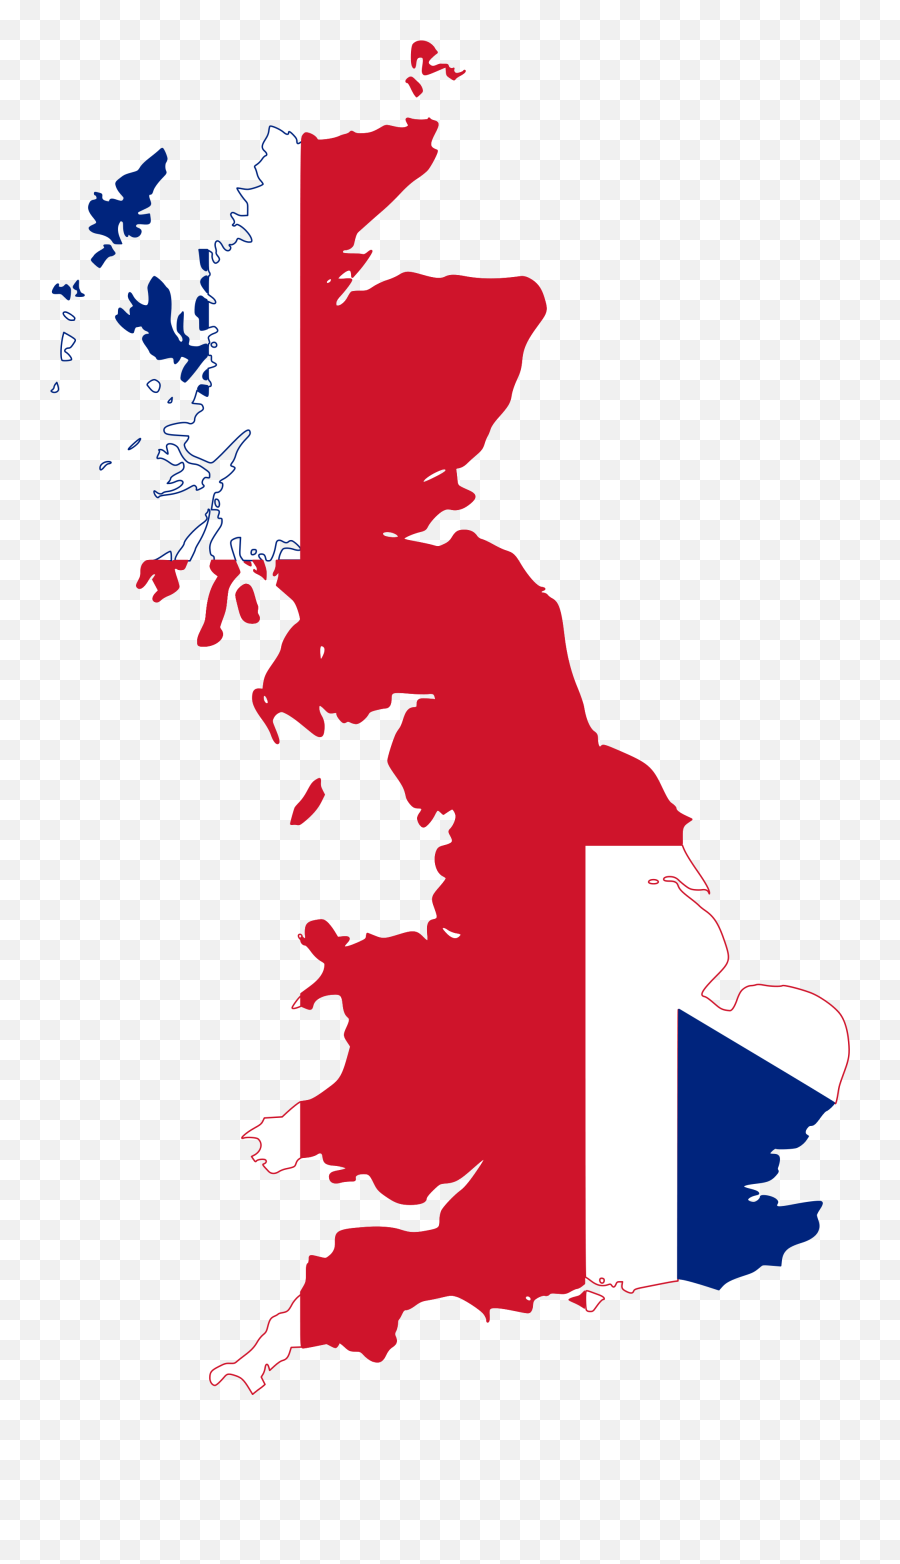 Download Open - Scotland England Wales Map Png Image With No Guildford On England Map,British Flag Icon